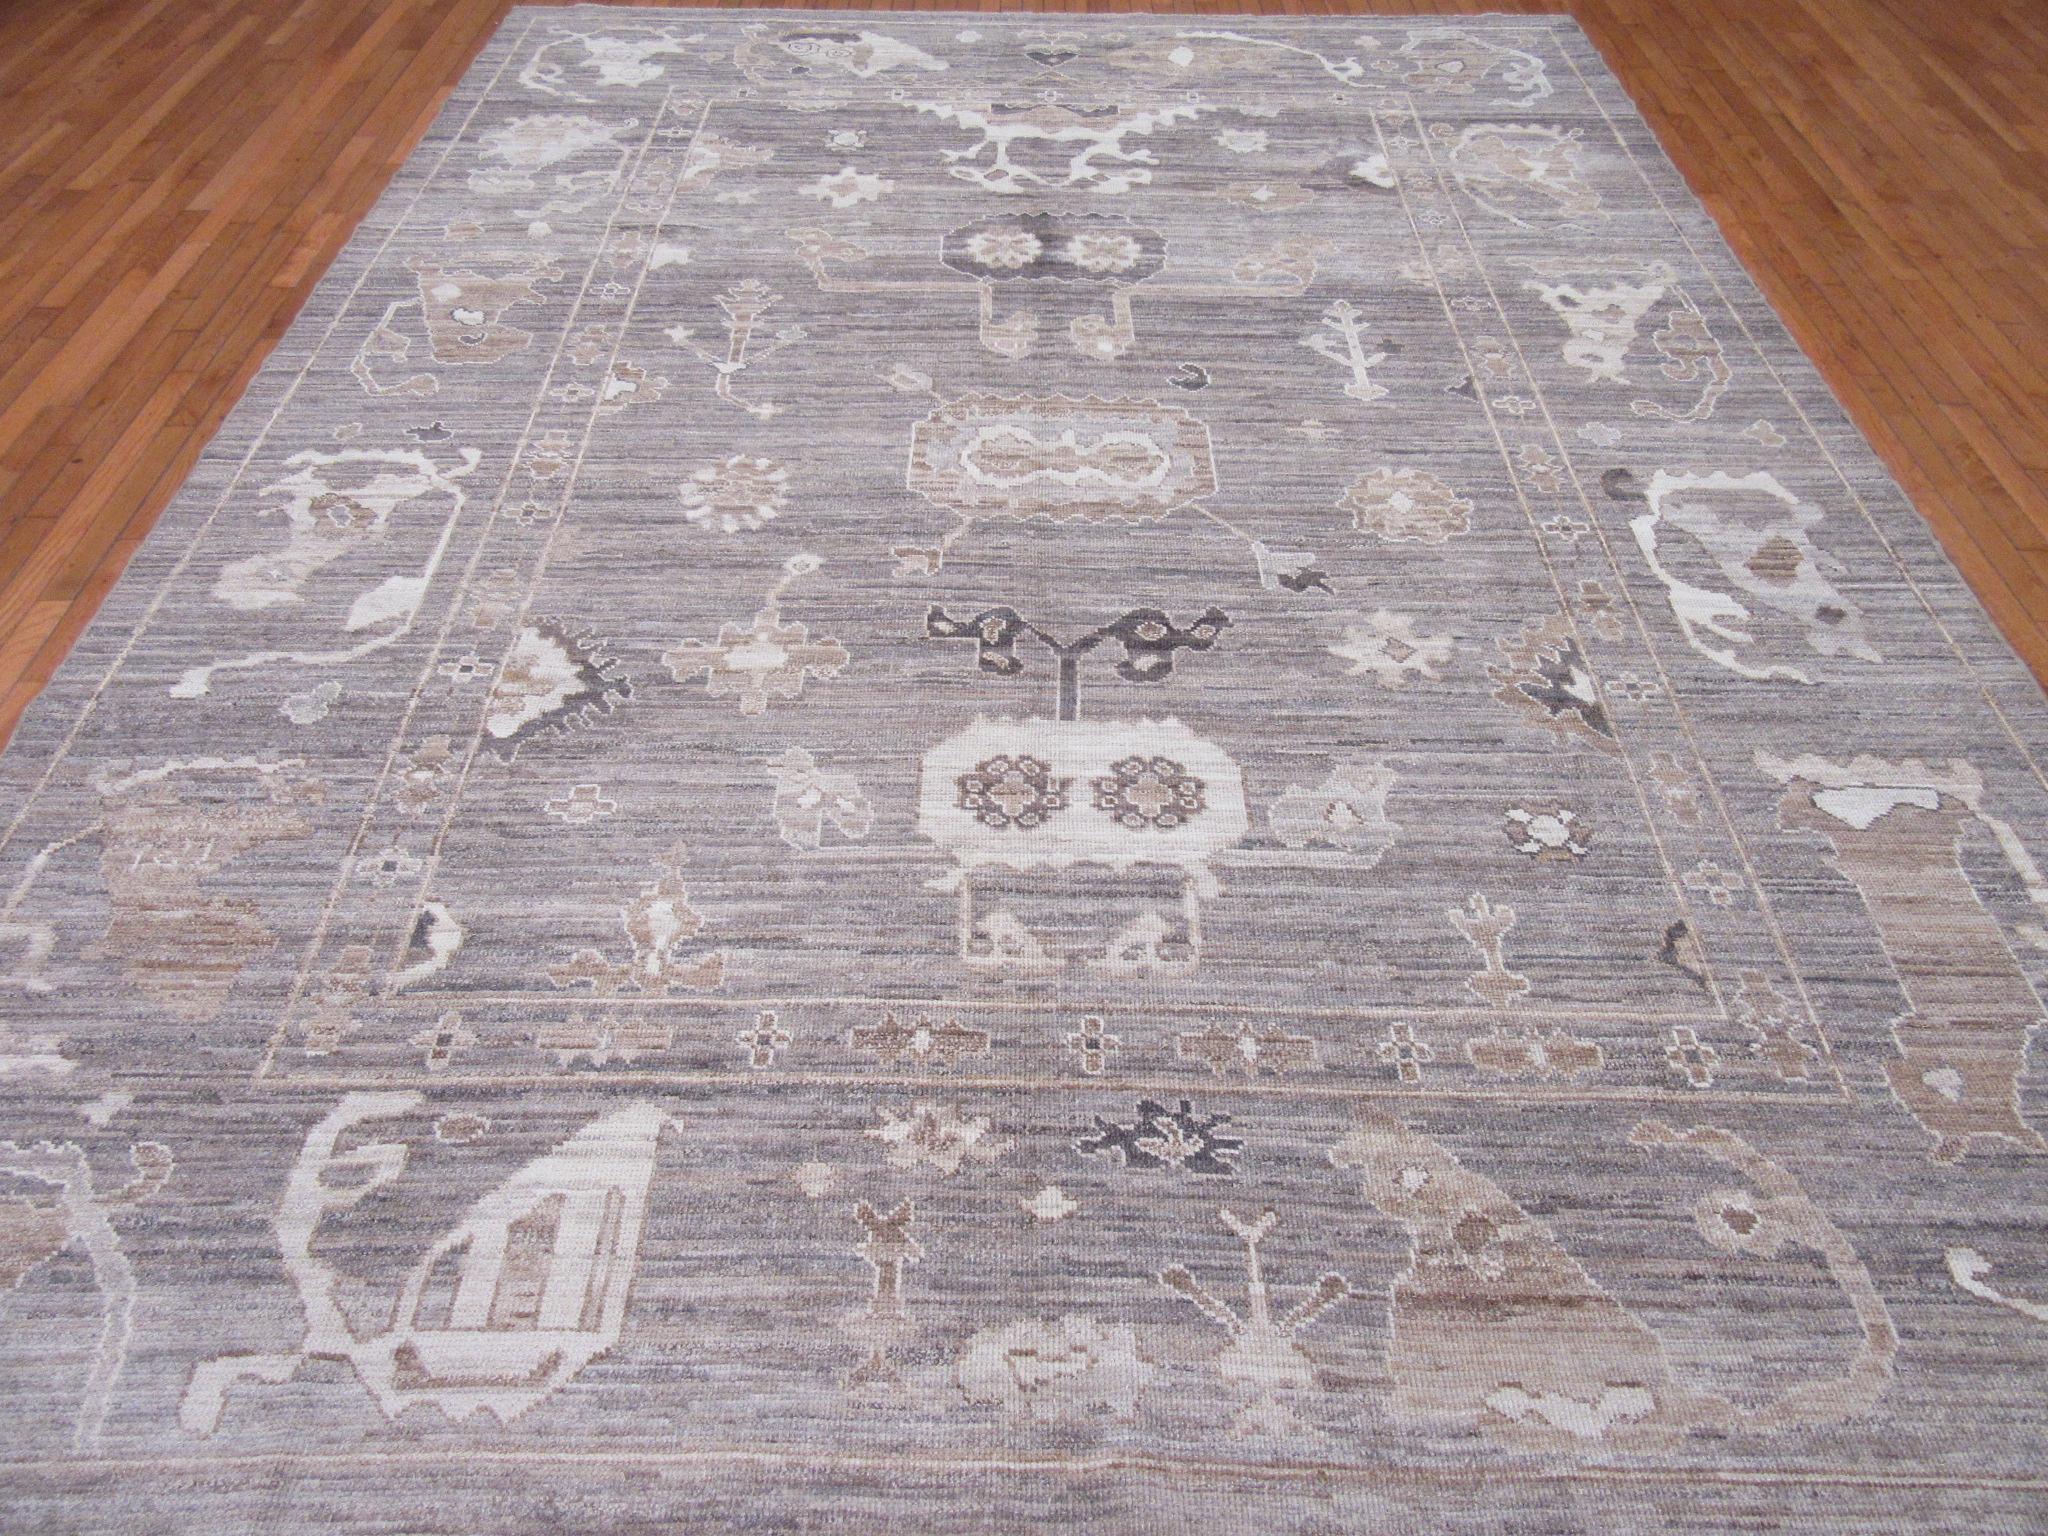 This is a new hand knotted Oushak design rug from Turkey. It is made with wool pile and wool on a wool foundation in gray tones. Its transitional all over pattern would make it a perfect choice for any room. The rug measures 9' x 12' 3''.